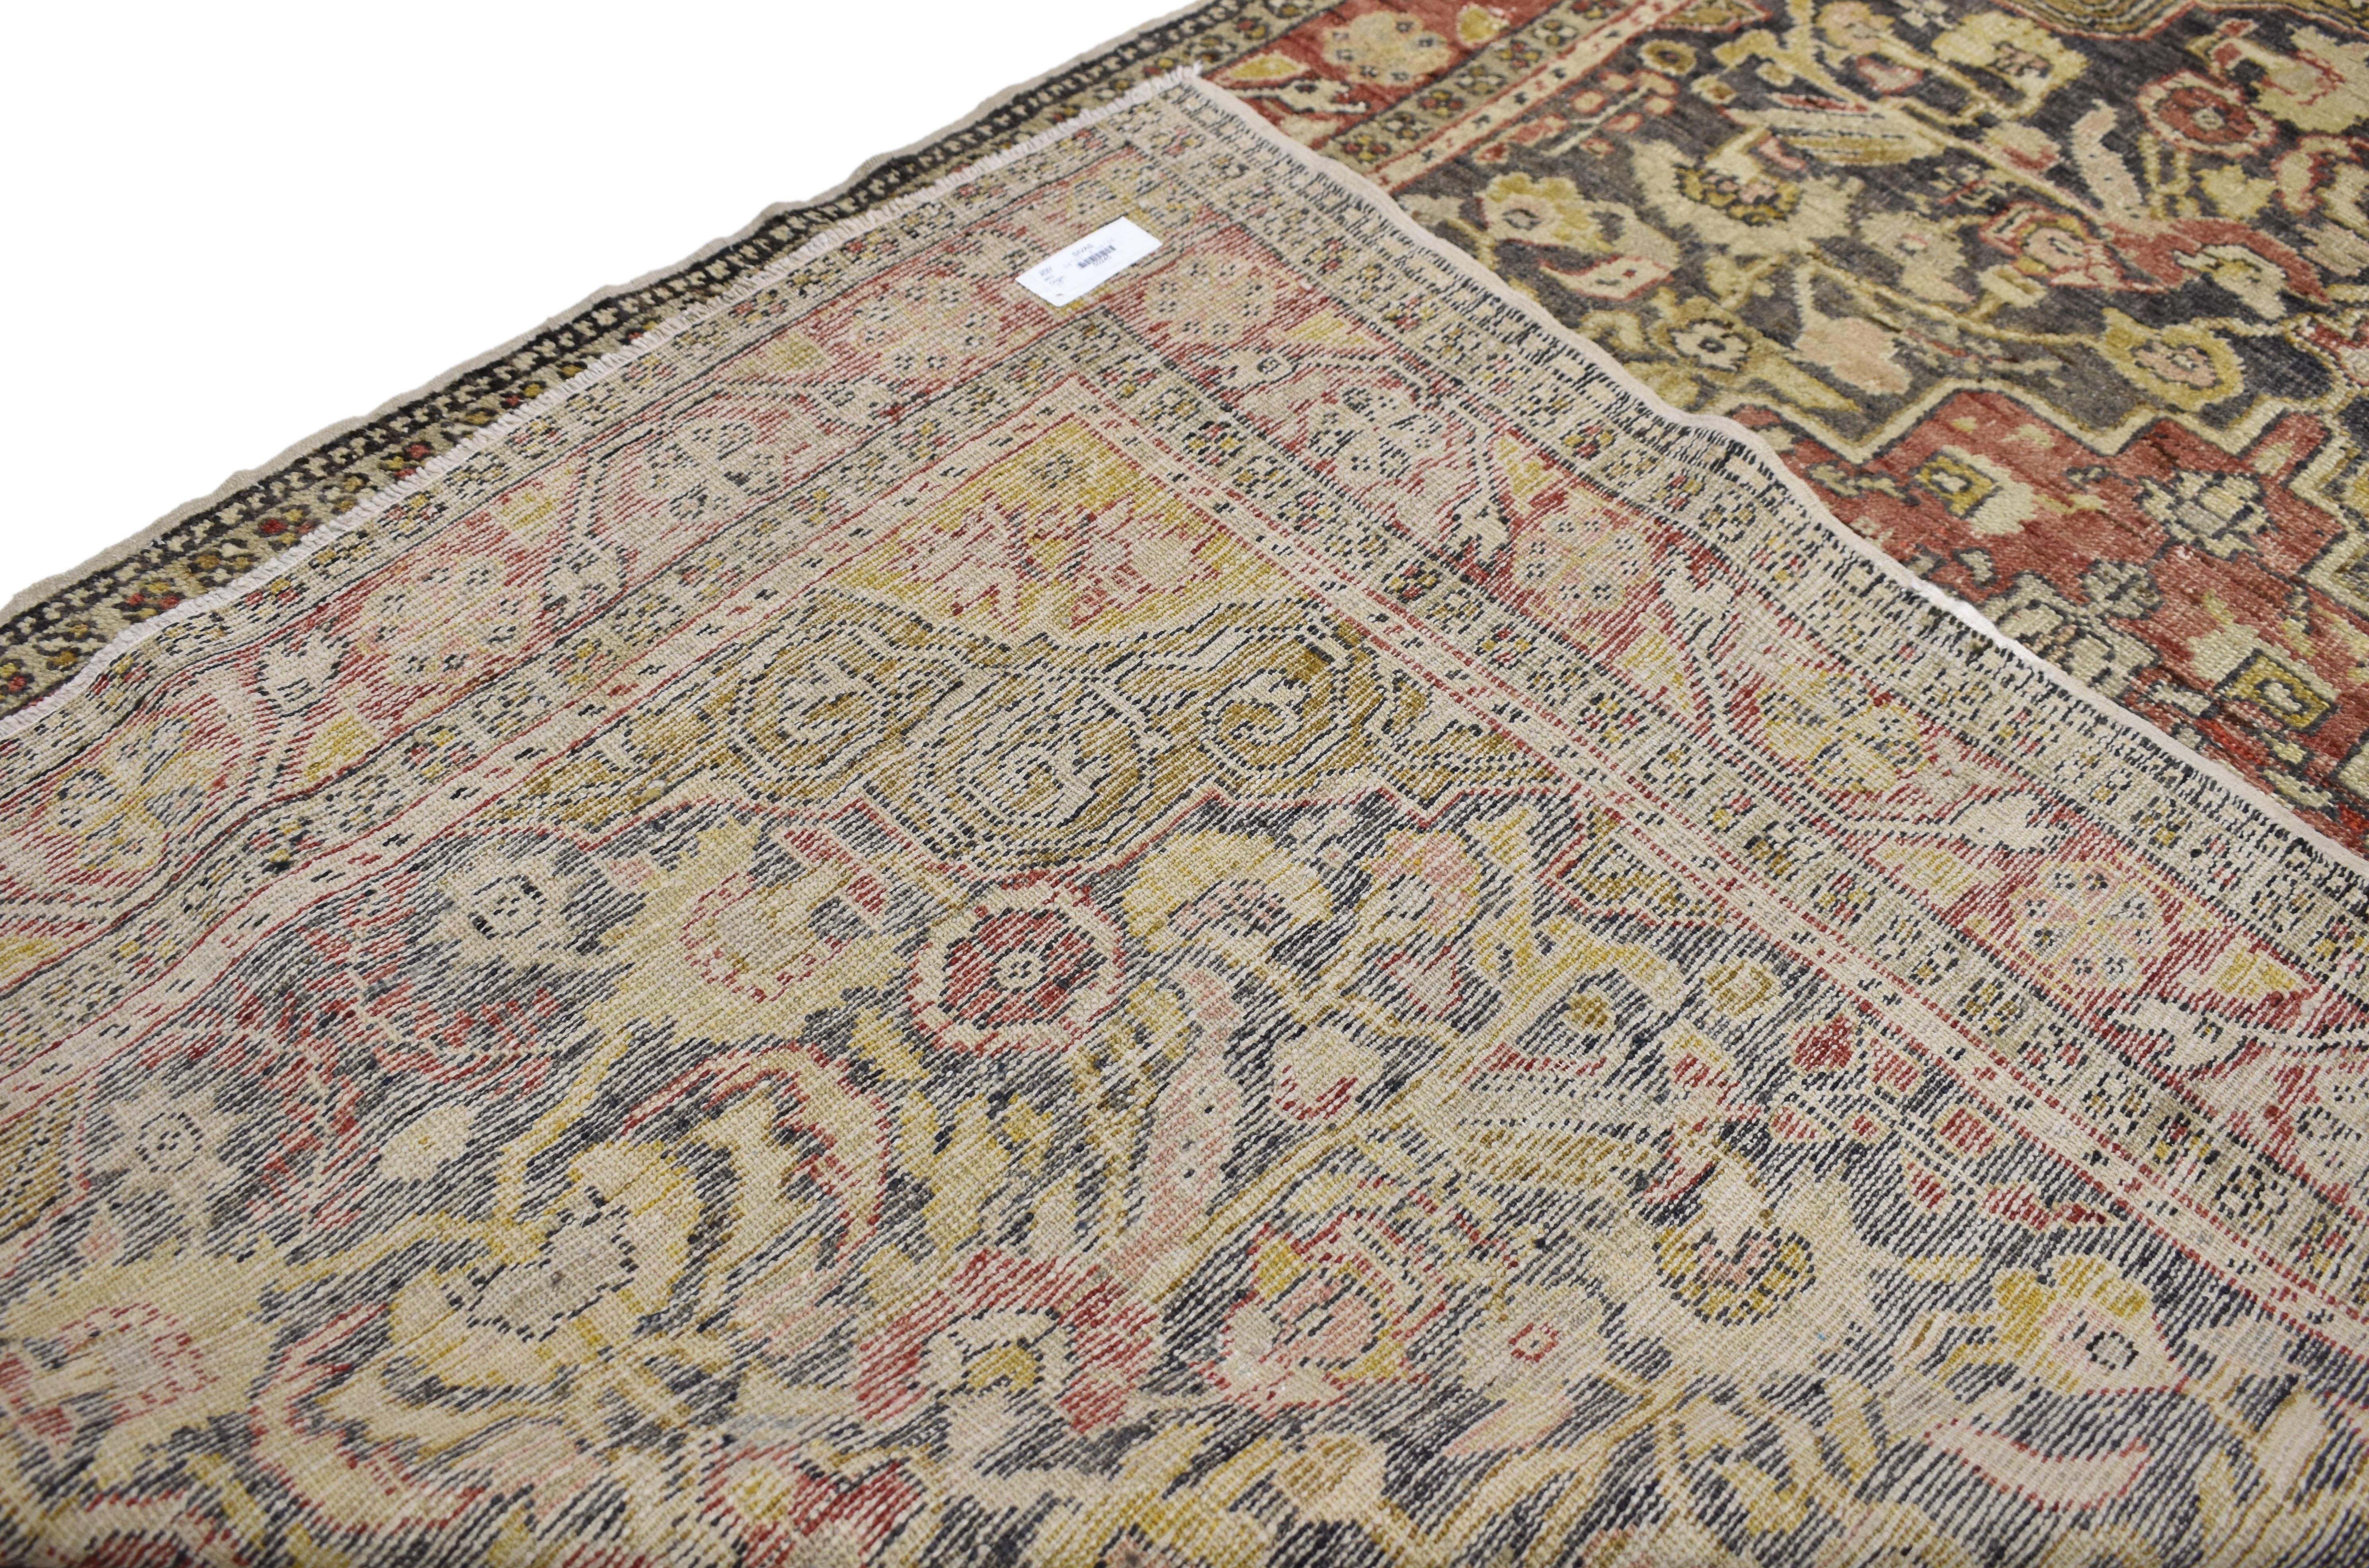 Antique Turkish Sivas Rug, Rustic Charm Meets Traditional Sensibility In Good Condition For Sale In Dallas, TX